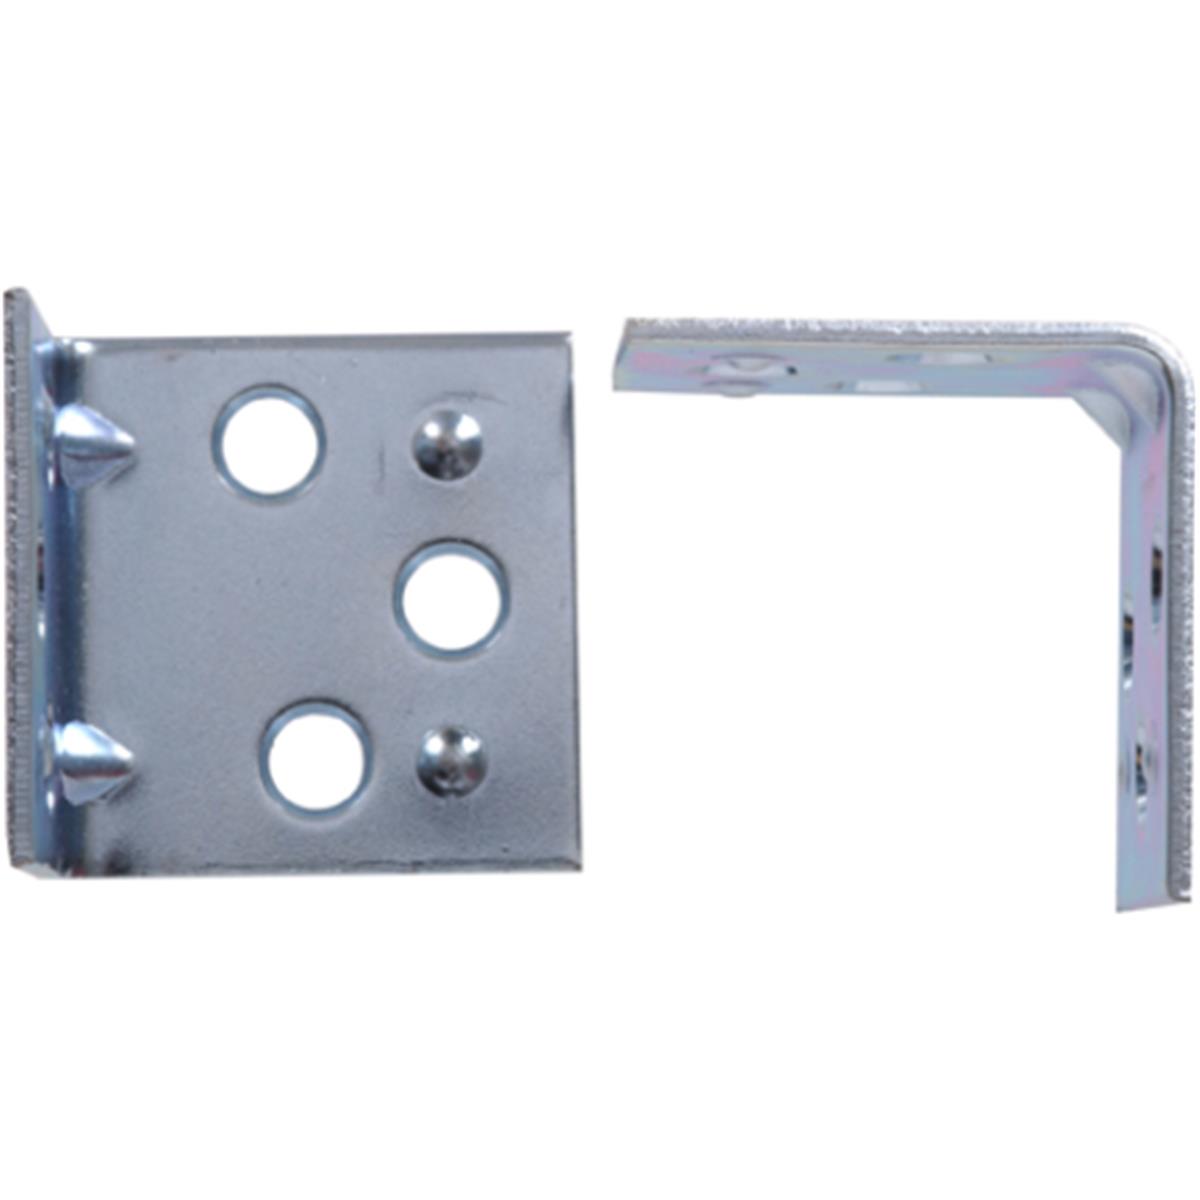 UPC 008236862751 product image for 851147 2 in. Zinc Plated Double Corner Brace | upcitemdb.com